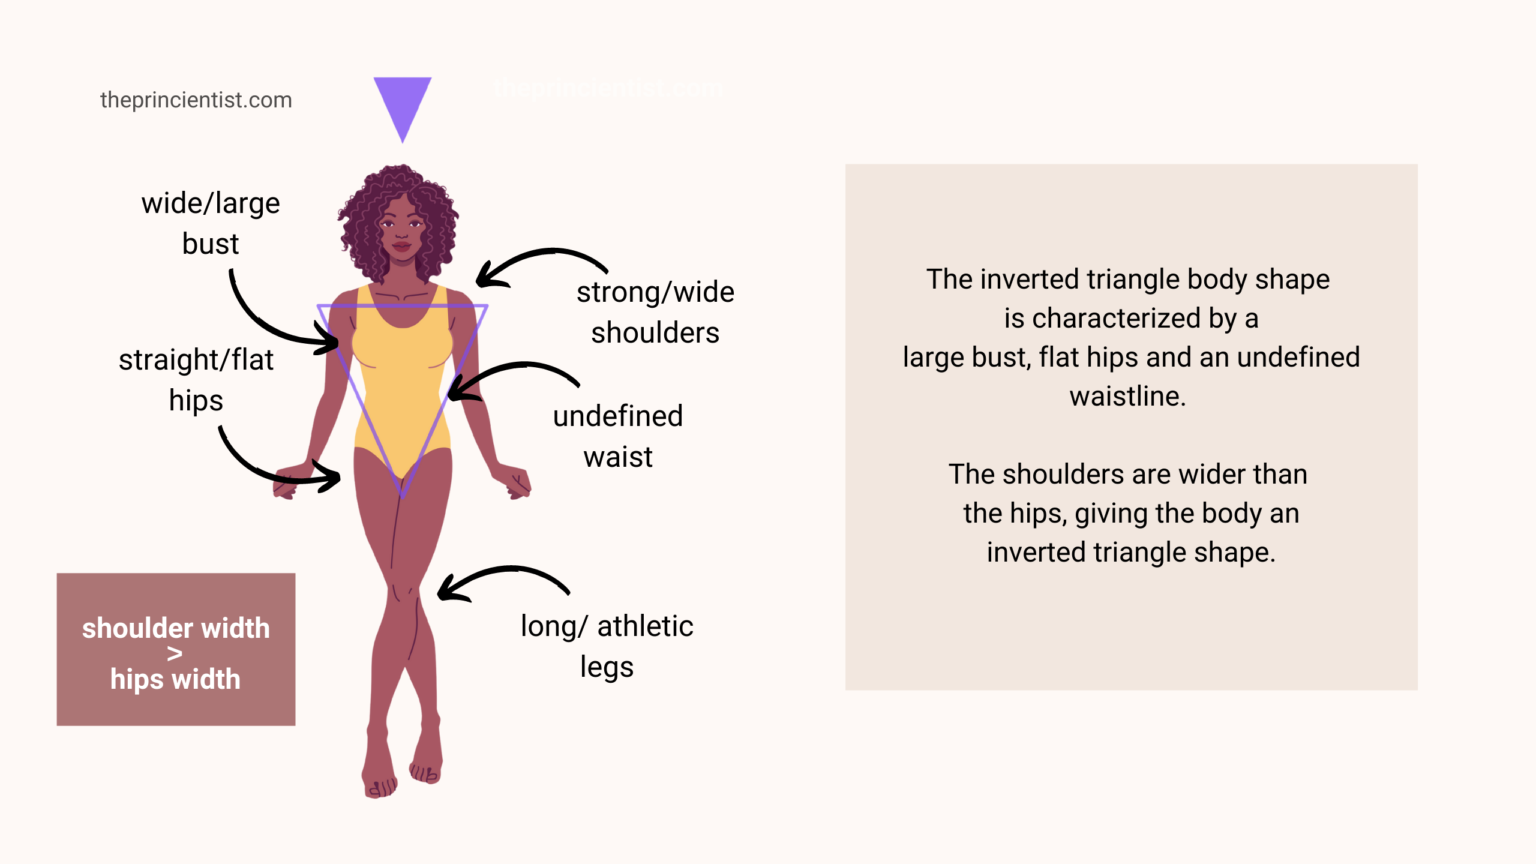 I am an inverted triangle - broad back,shoulders and waist with